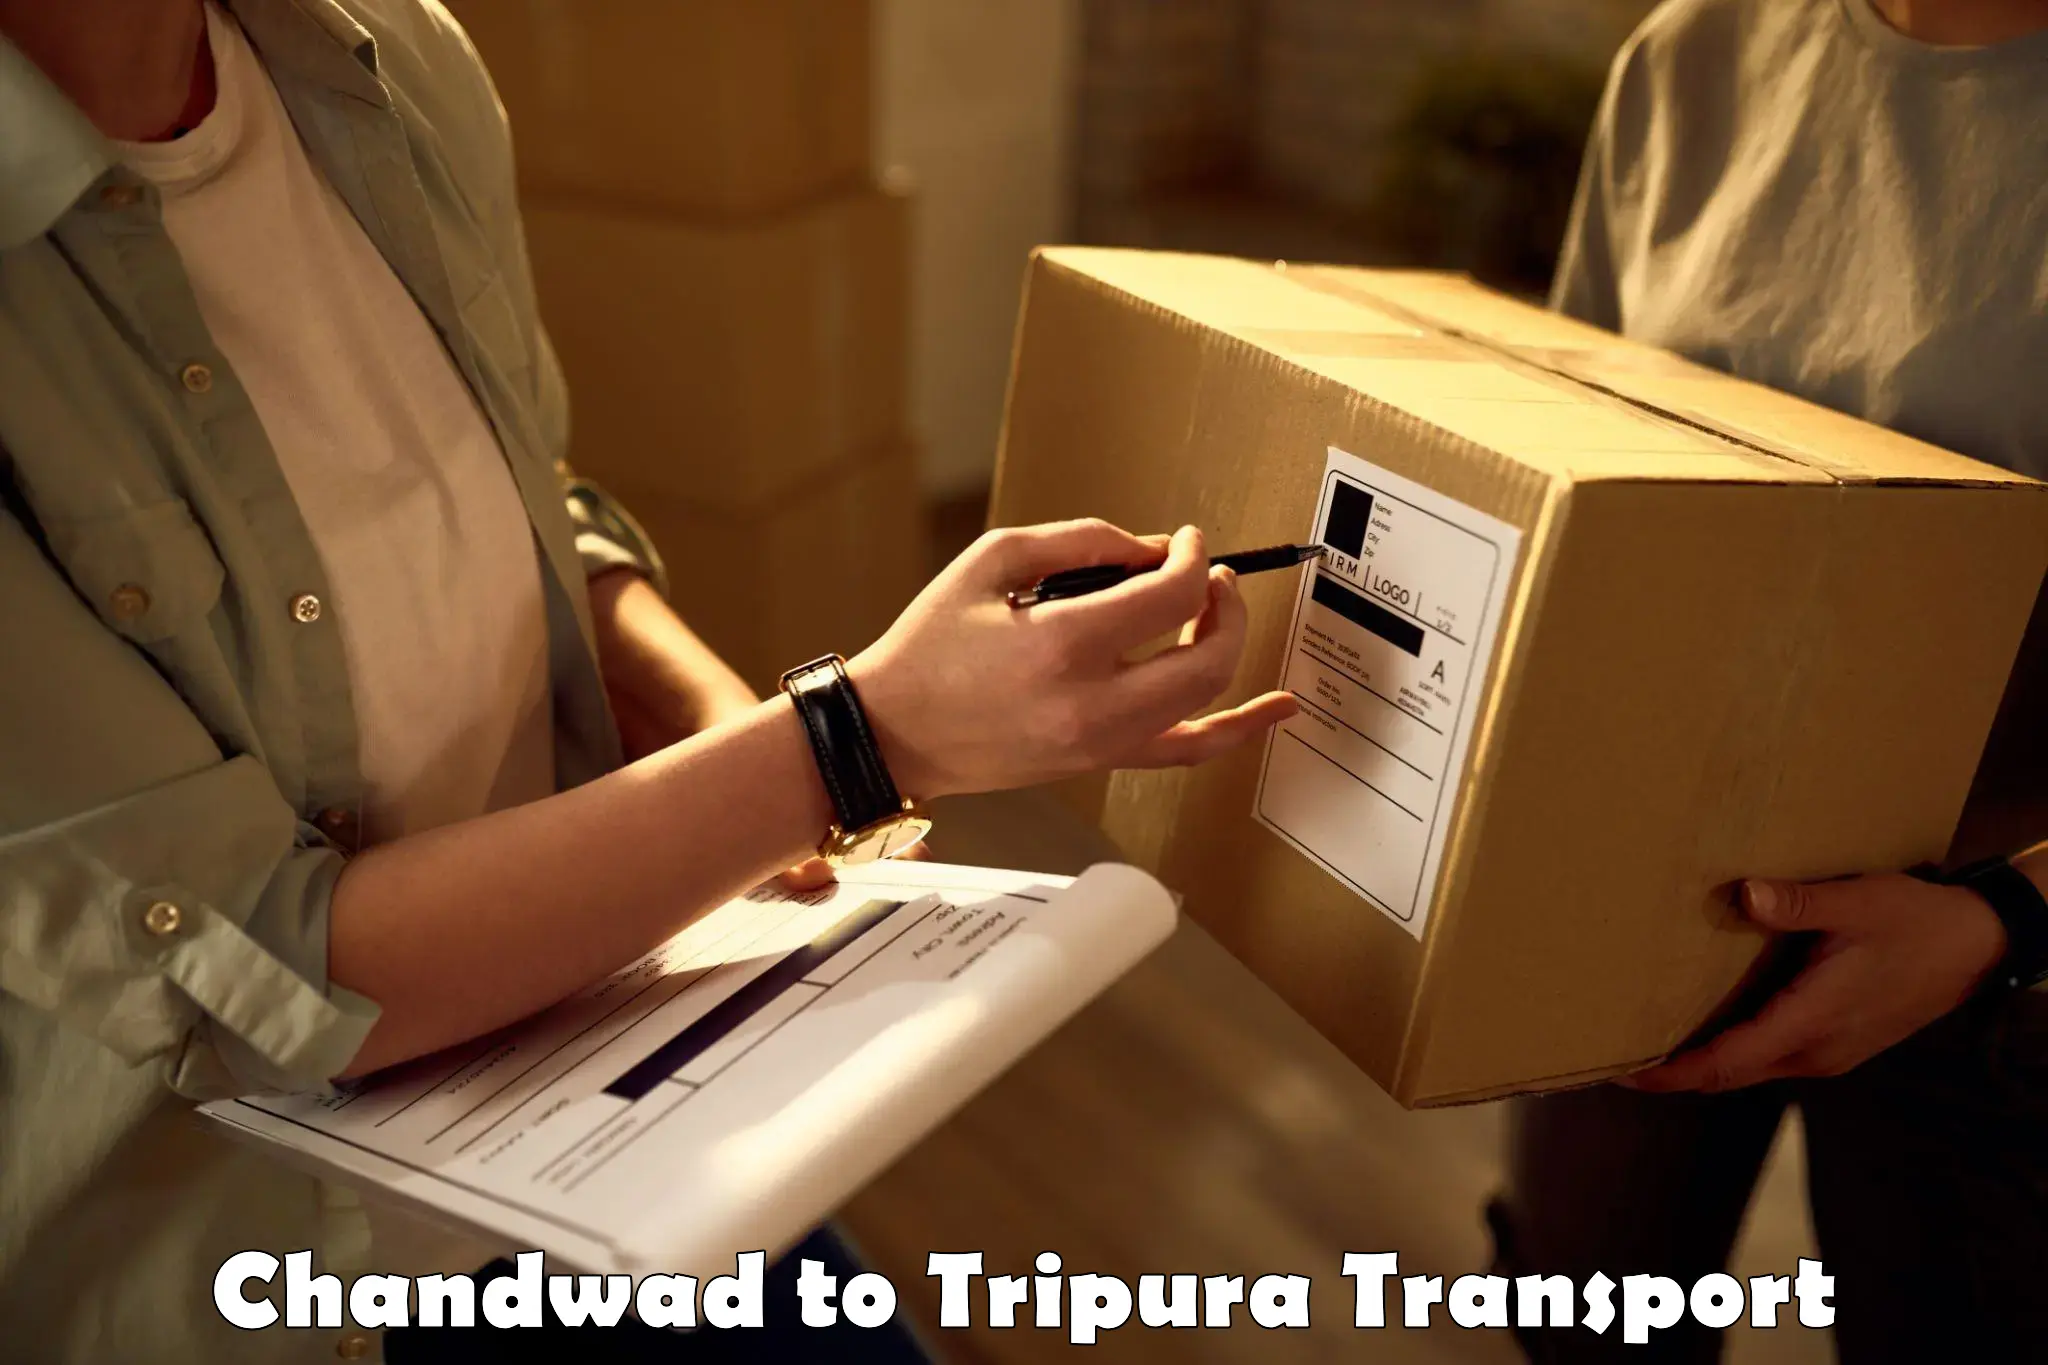 Air freight transport services in Chandwad to Udaipur Tripura